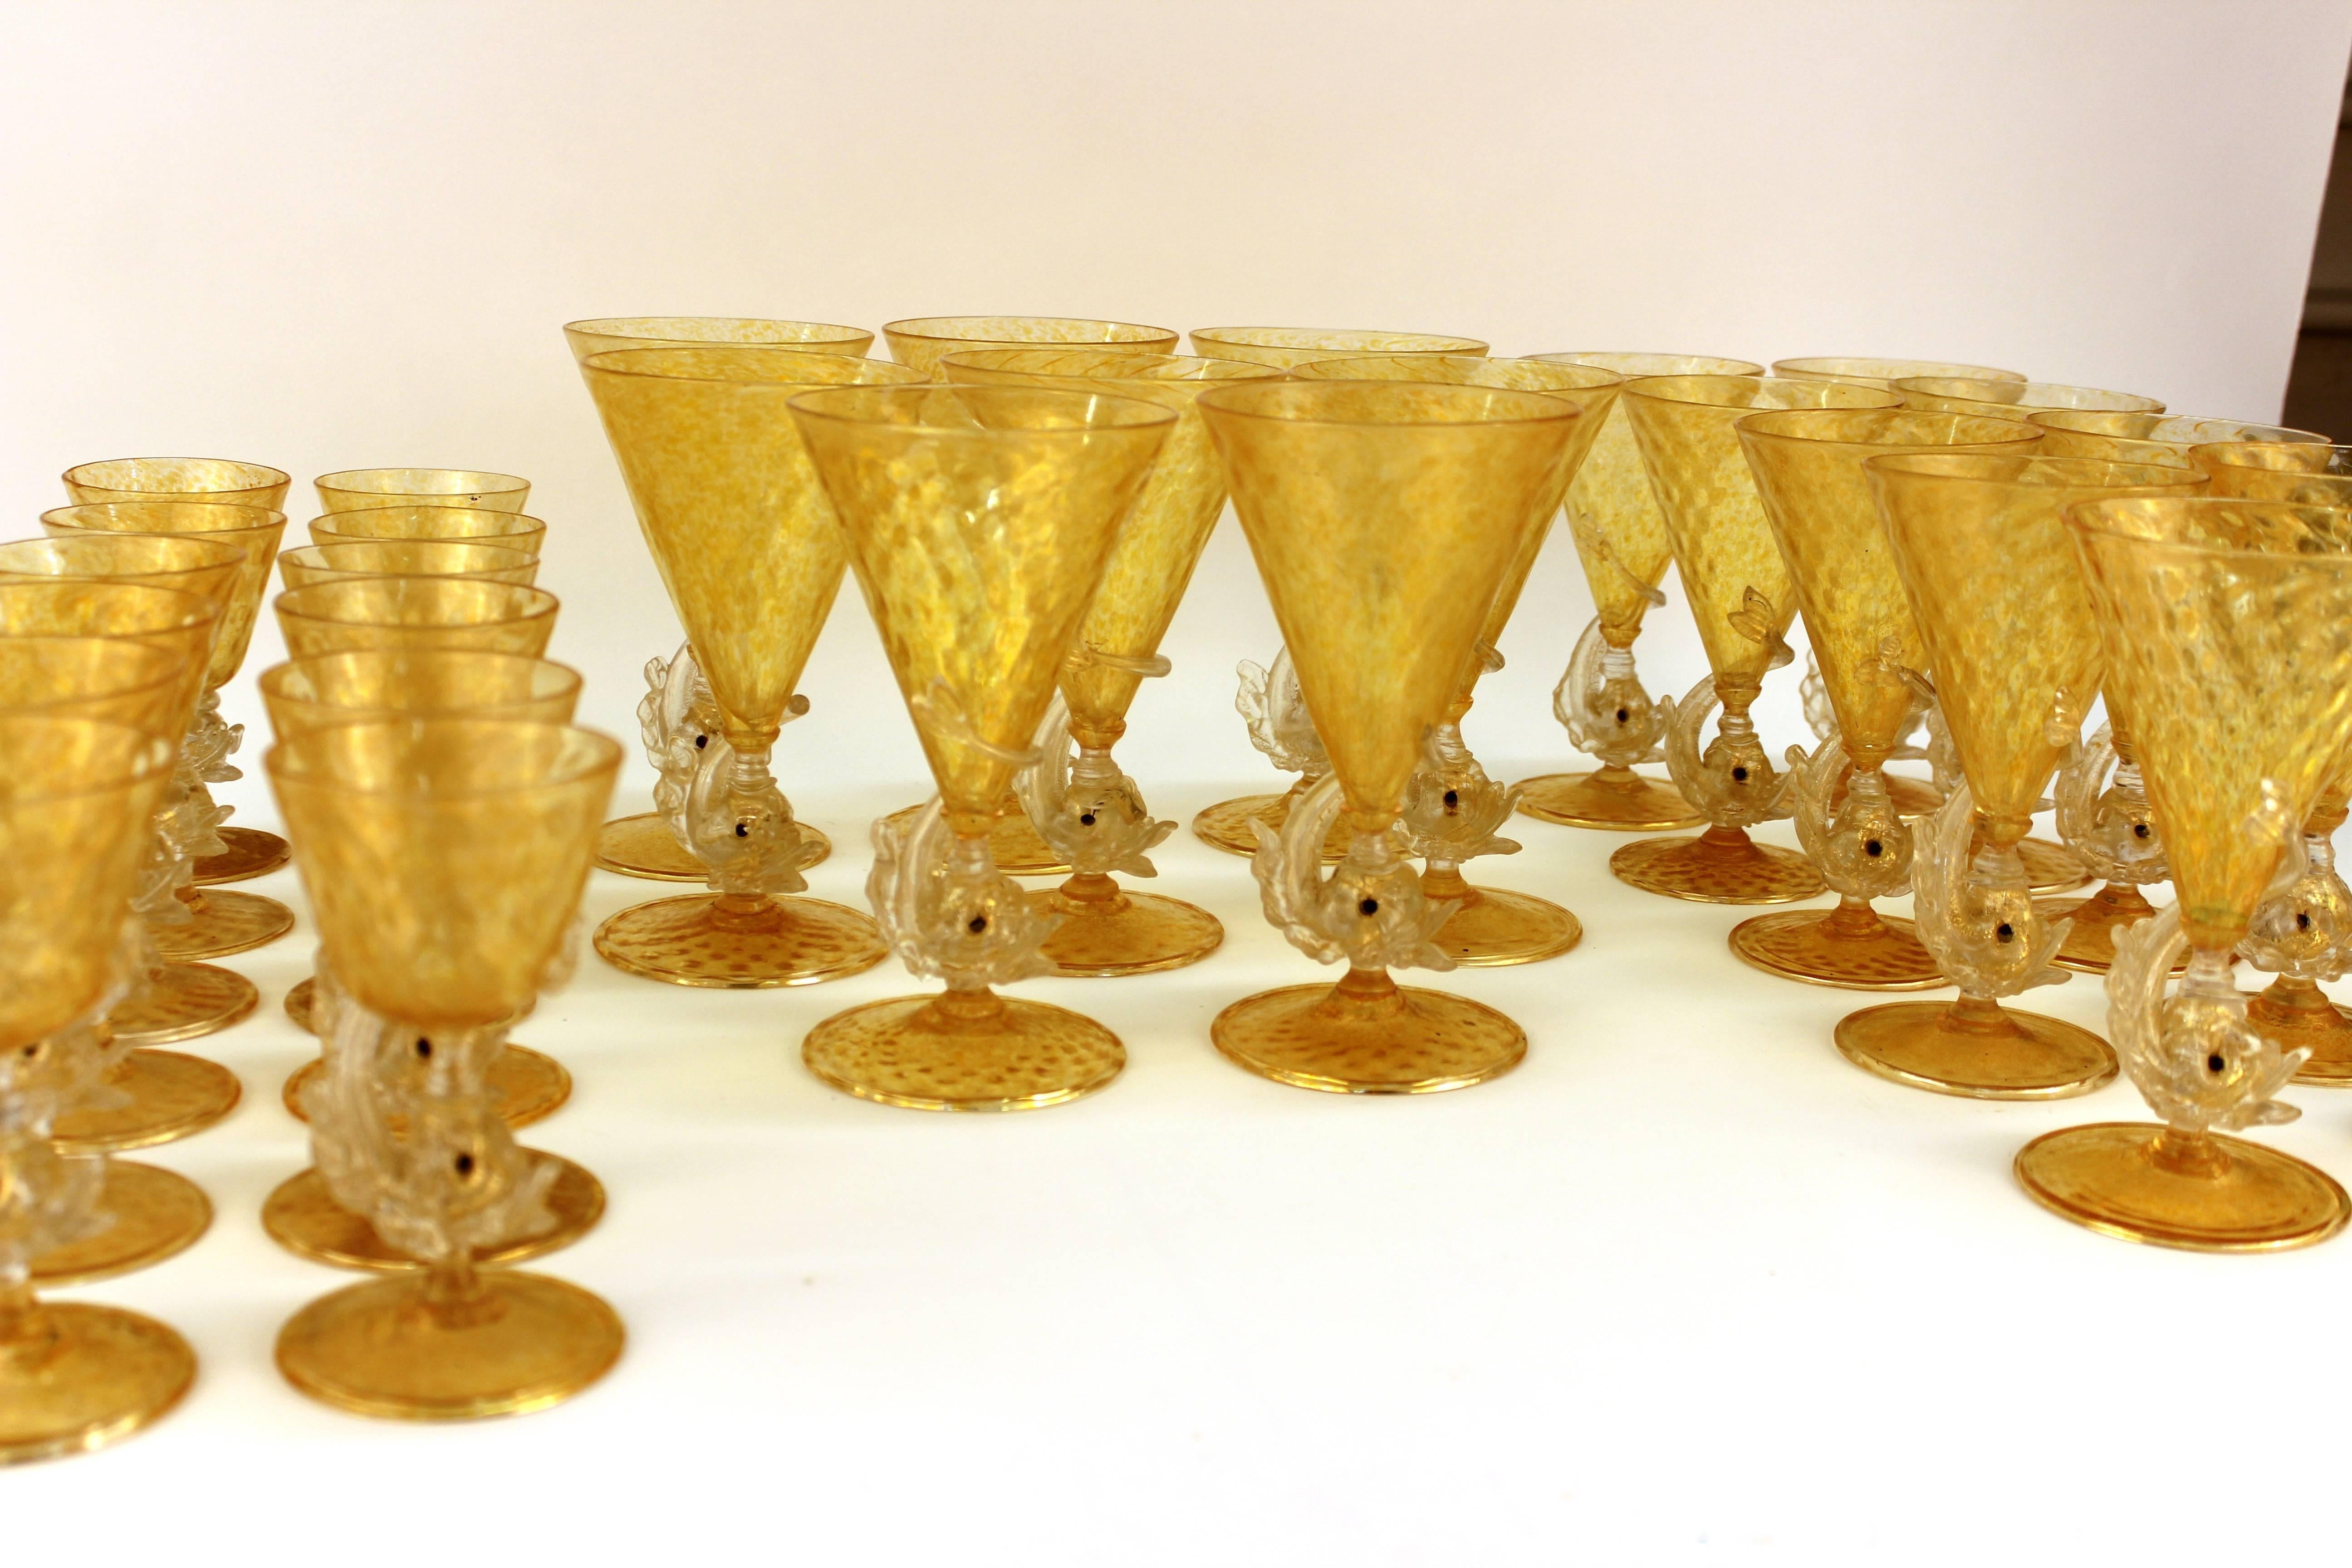 Salviati glassware set including ten wine glasses, 12 liquor glasses and eight water glasses. Each piece is crafted from yellow specked Murano glass. Each stem features stylized fish curving from the base to the bottom of the cup. Some chips and